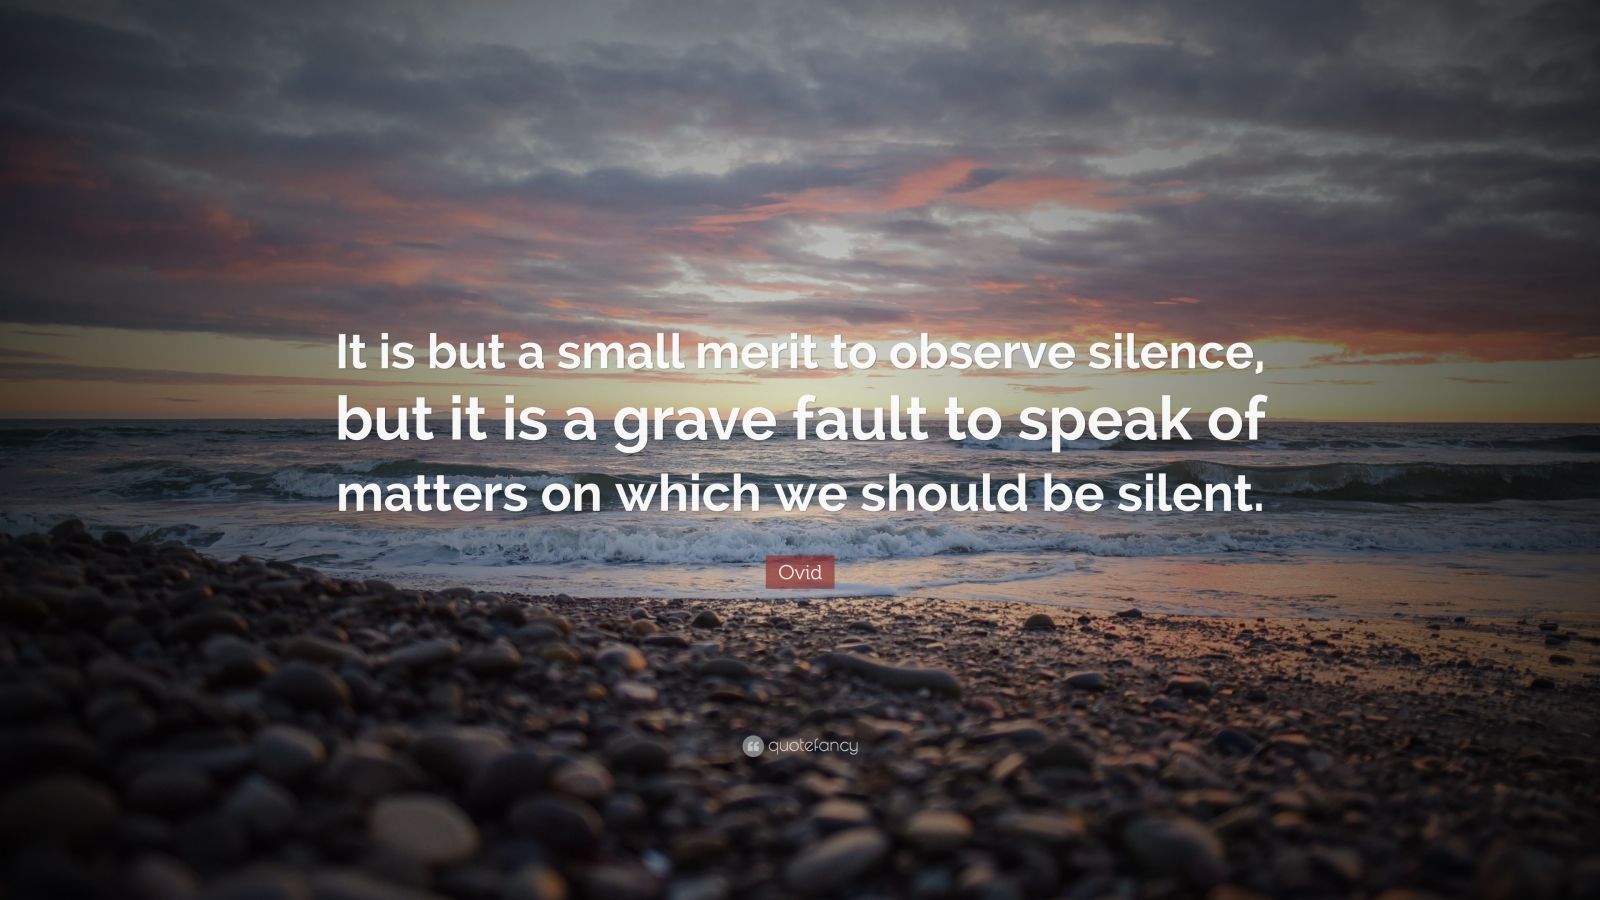 Ovid Quote “It is but a small merit to observe silence, but it is a